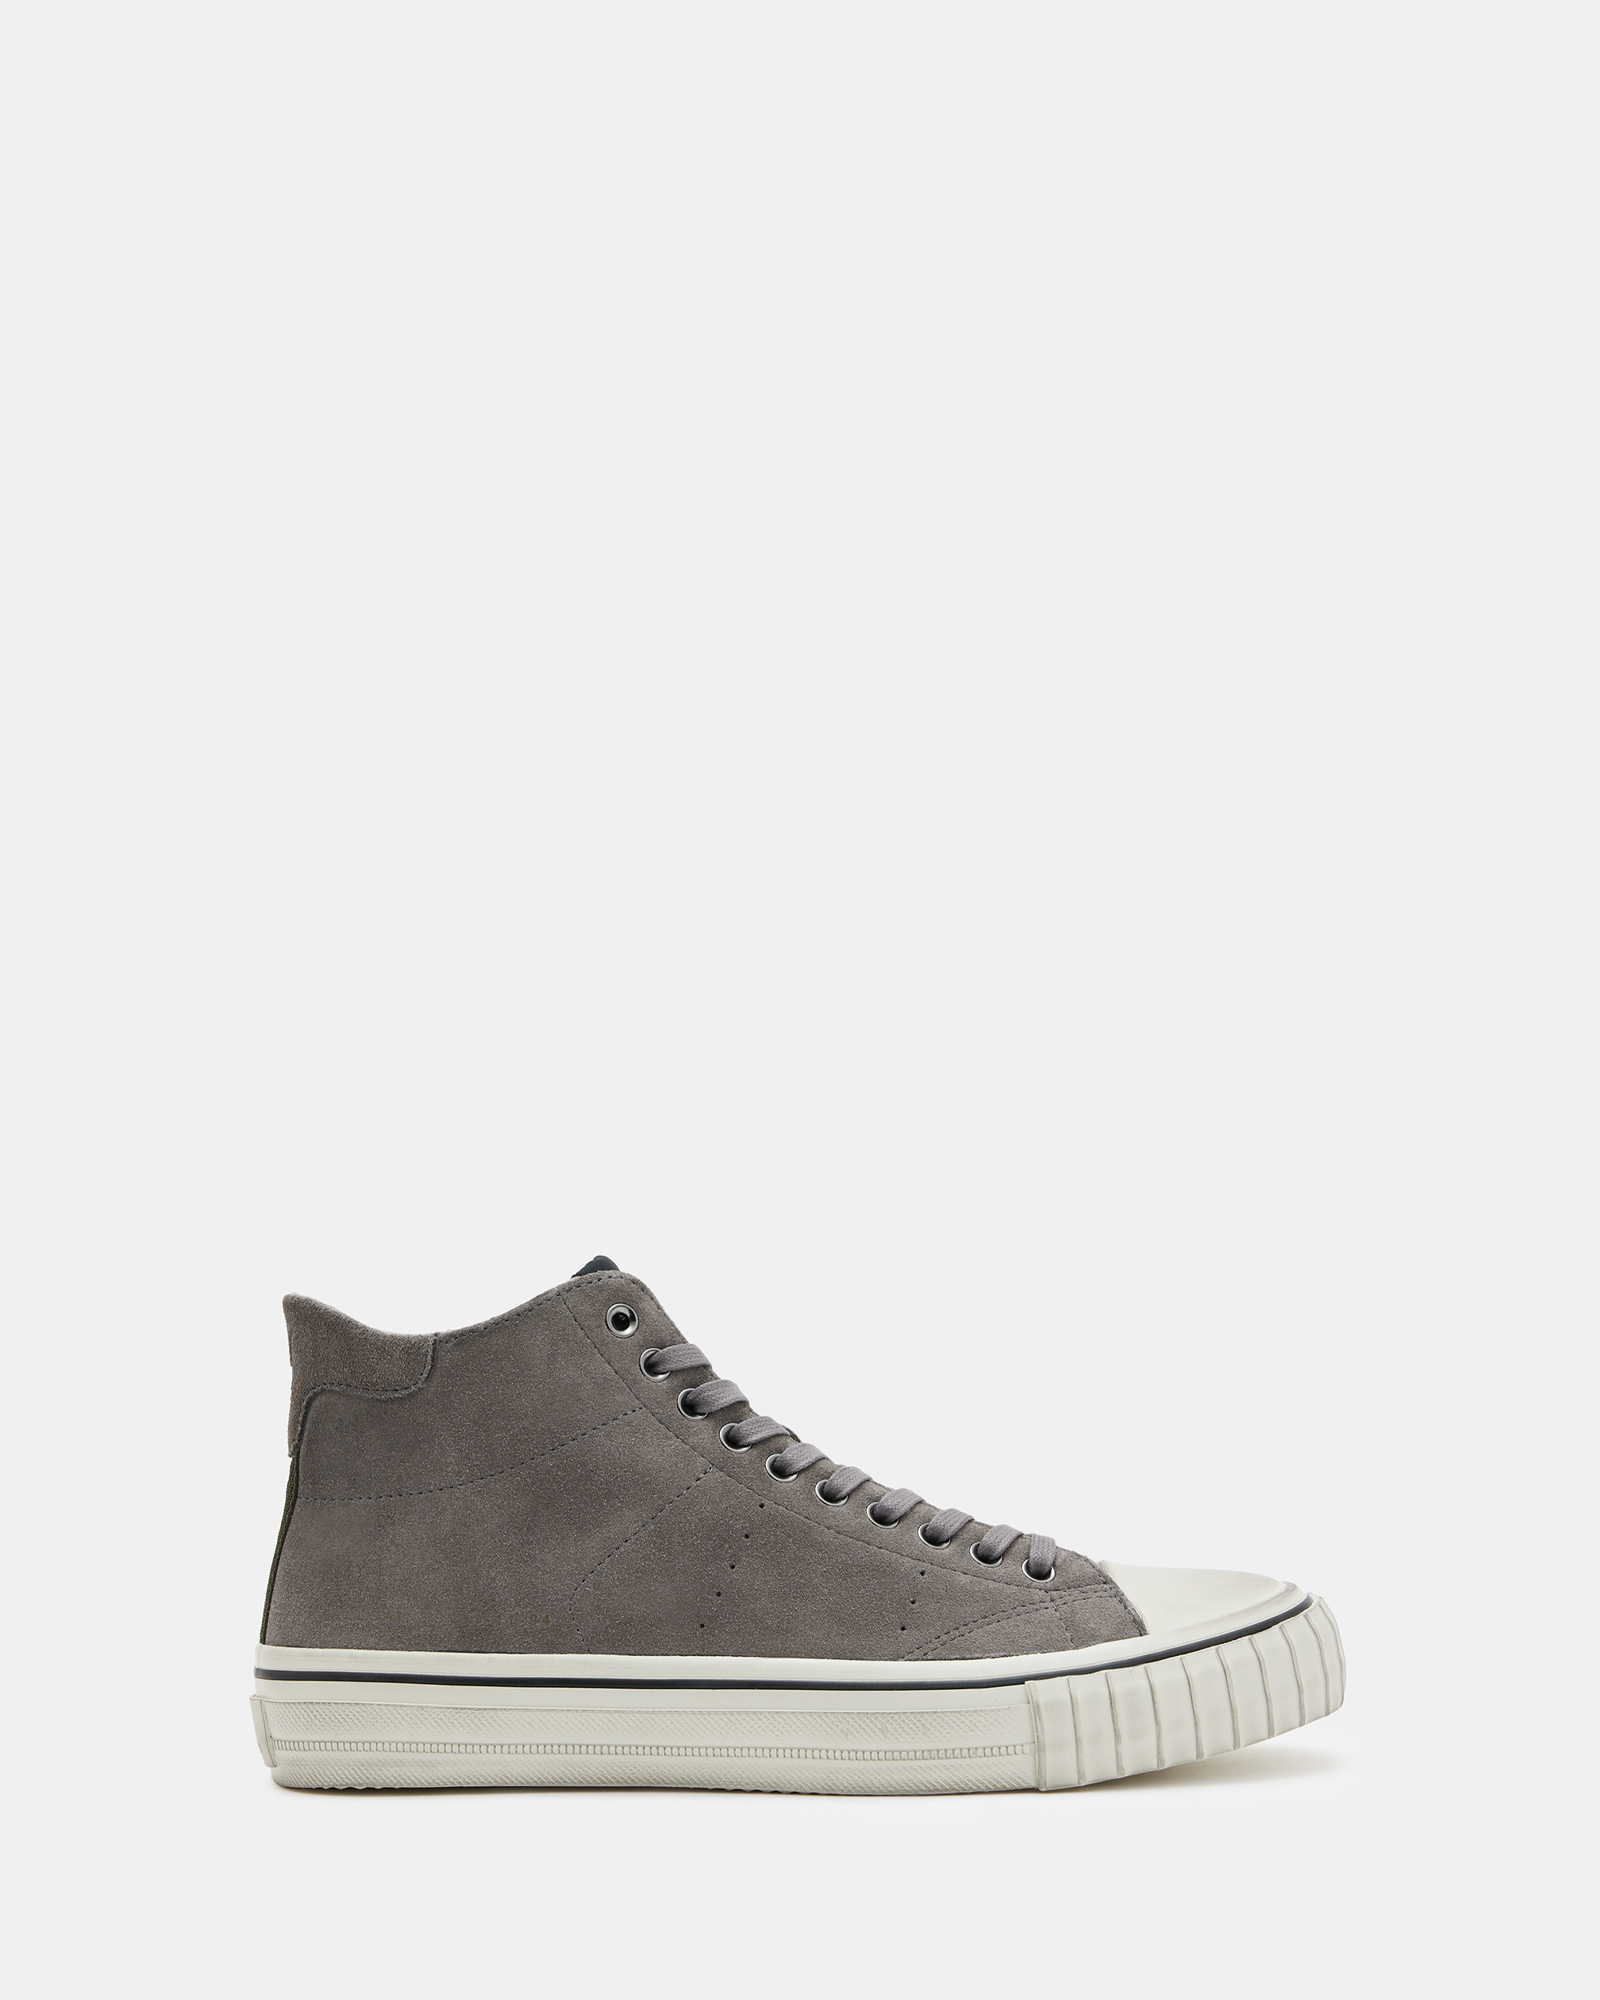 AllSaints Lewis Lace Up Suede High Top Sneakers